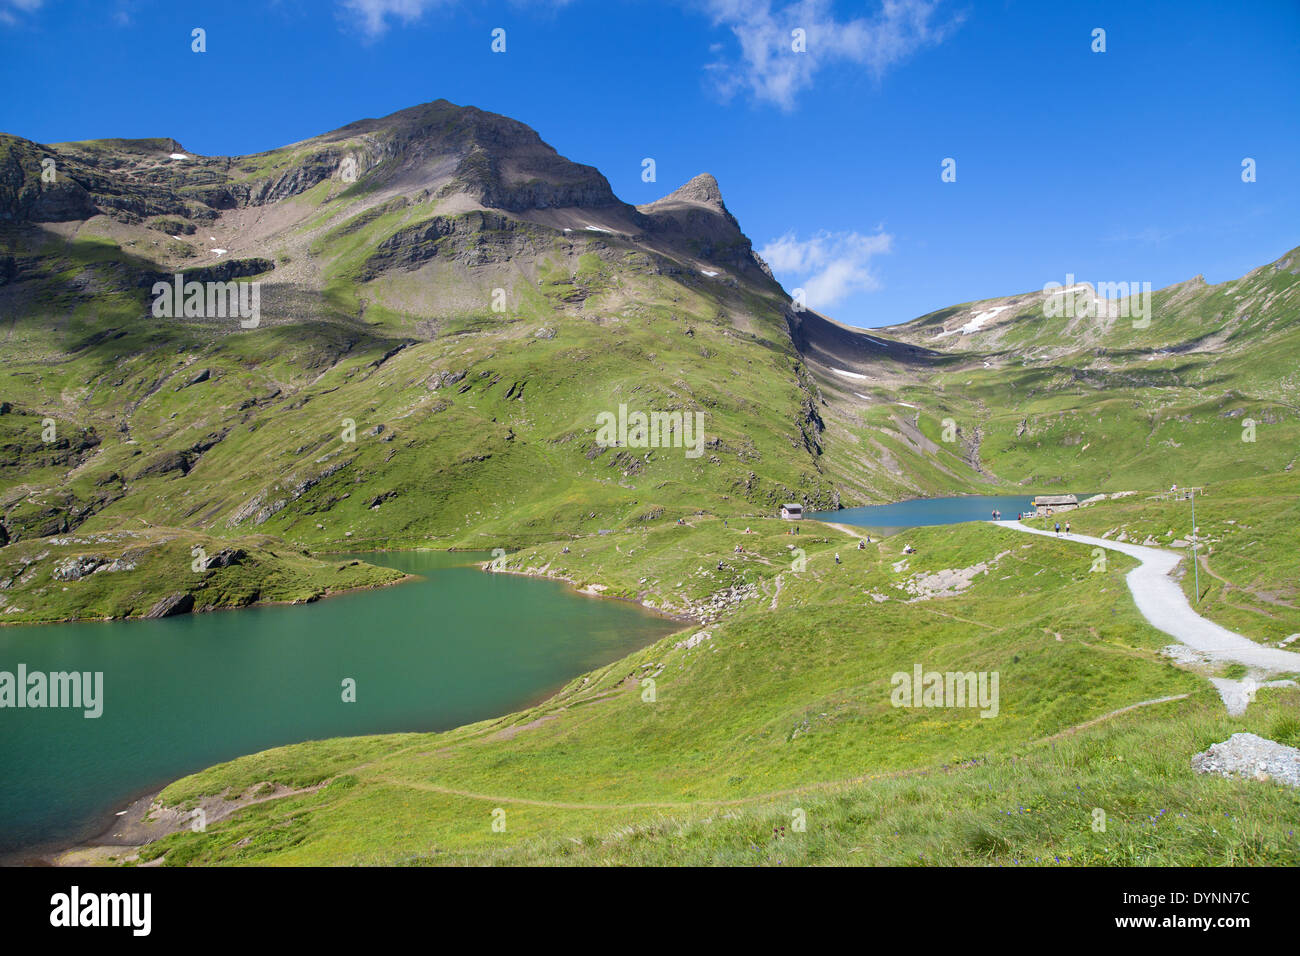 Bachalpsee lakes in Grindelwald, Switzerland. Stock Photo